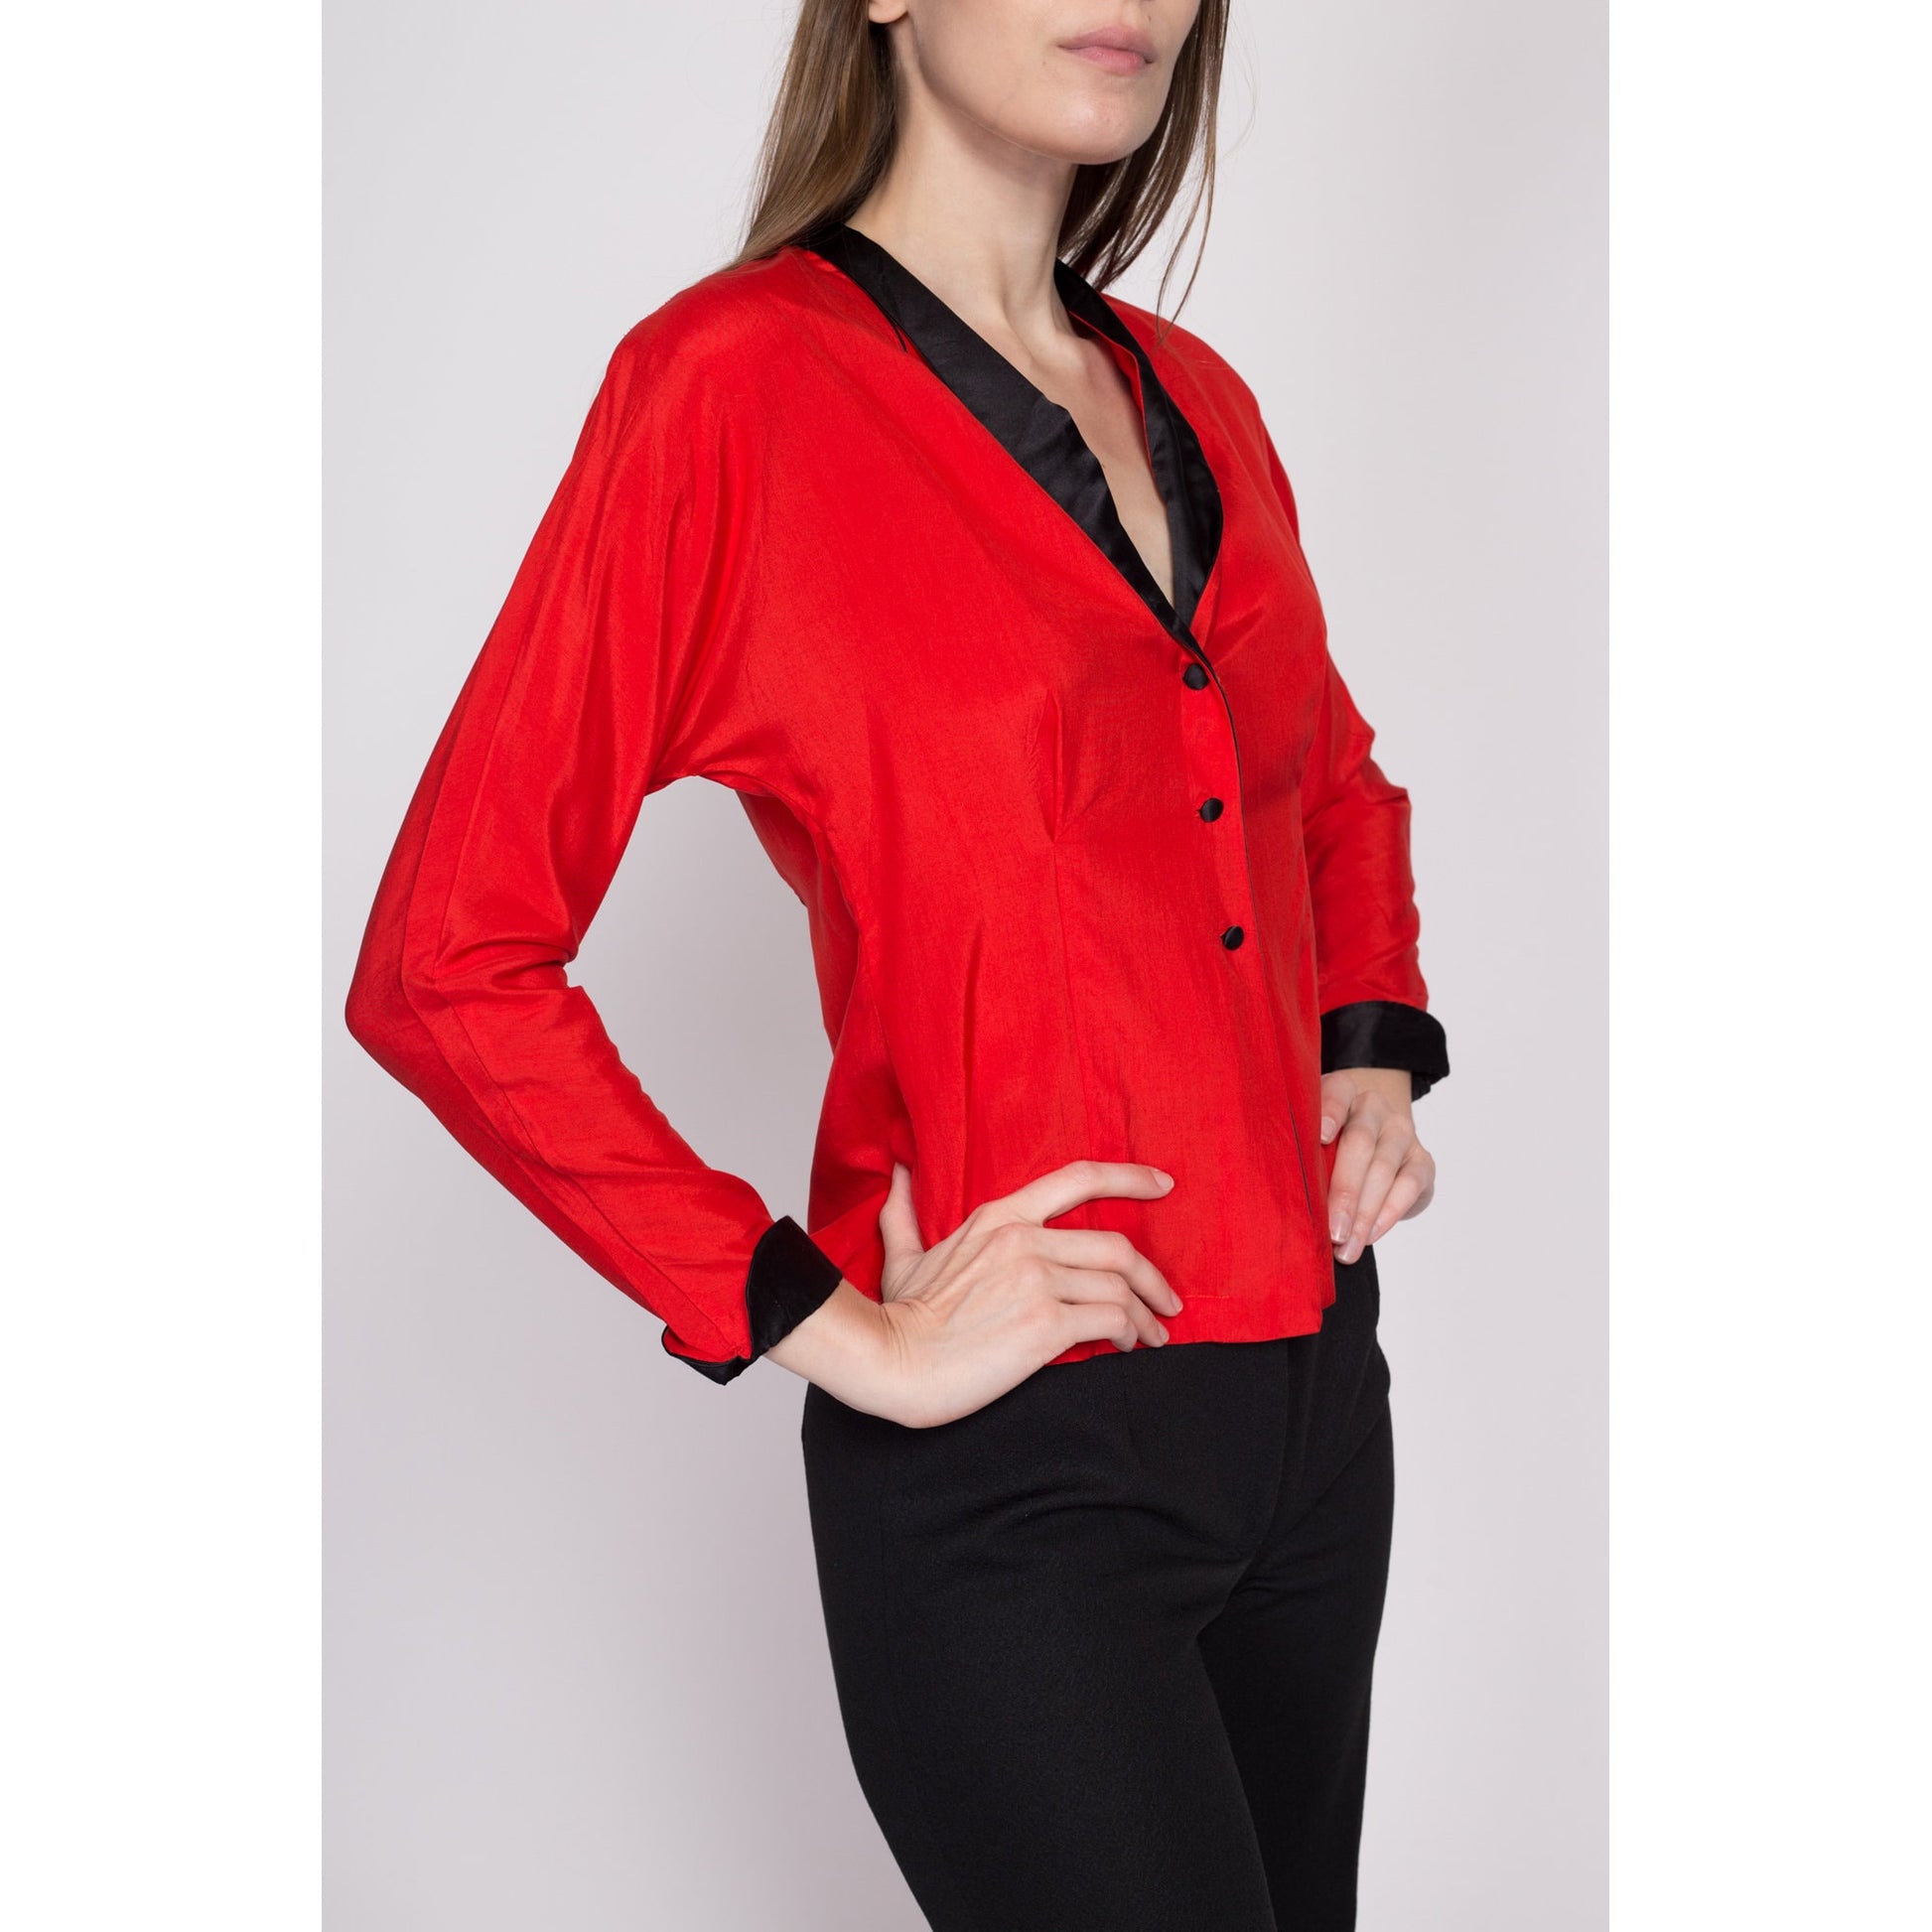 S| 80s Red Silk Western Blouse - Small | Vintage Mercedes & Adrienne Retro Collared Long Sleeve Secretary Top